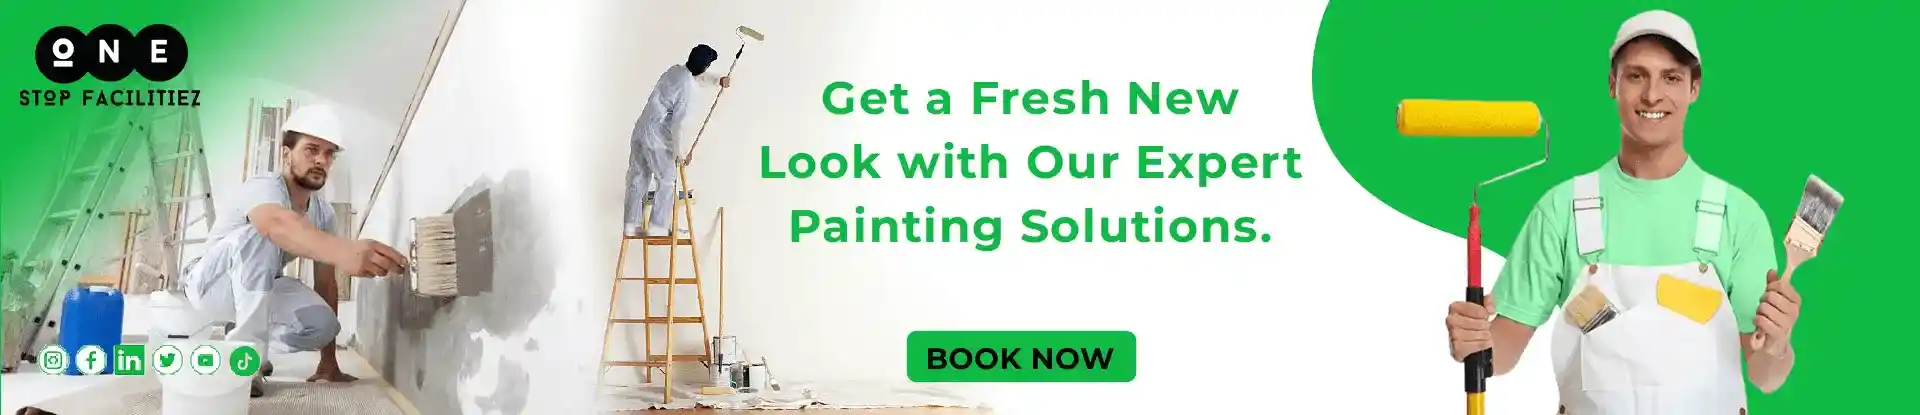 Painting Service Image